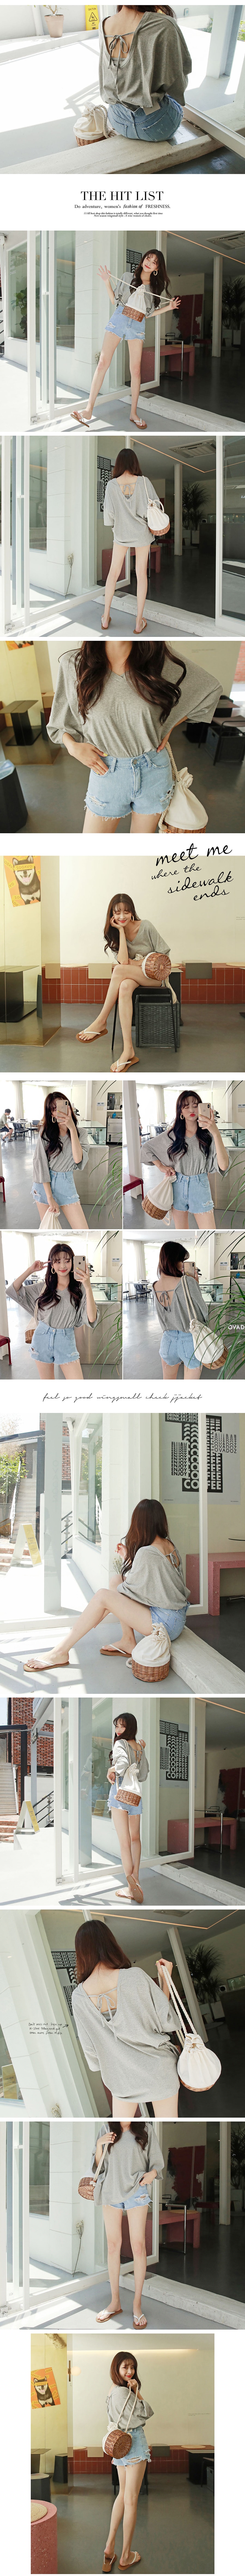 V-Neck Tie Back T-Shirt+Crop Tube Top 2 Pieces Set #Grey One Size(Free)